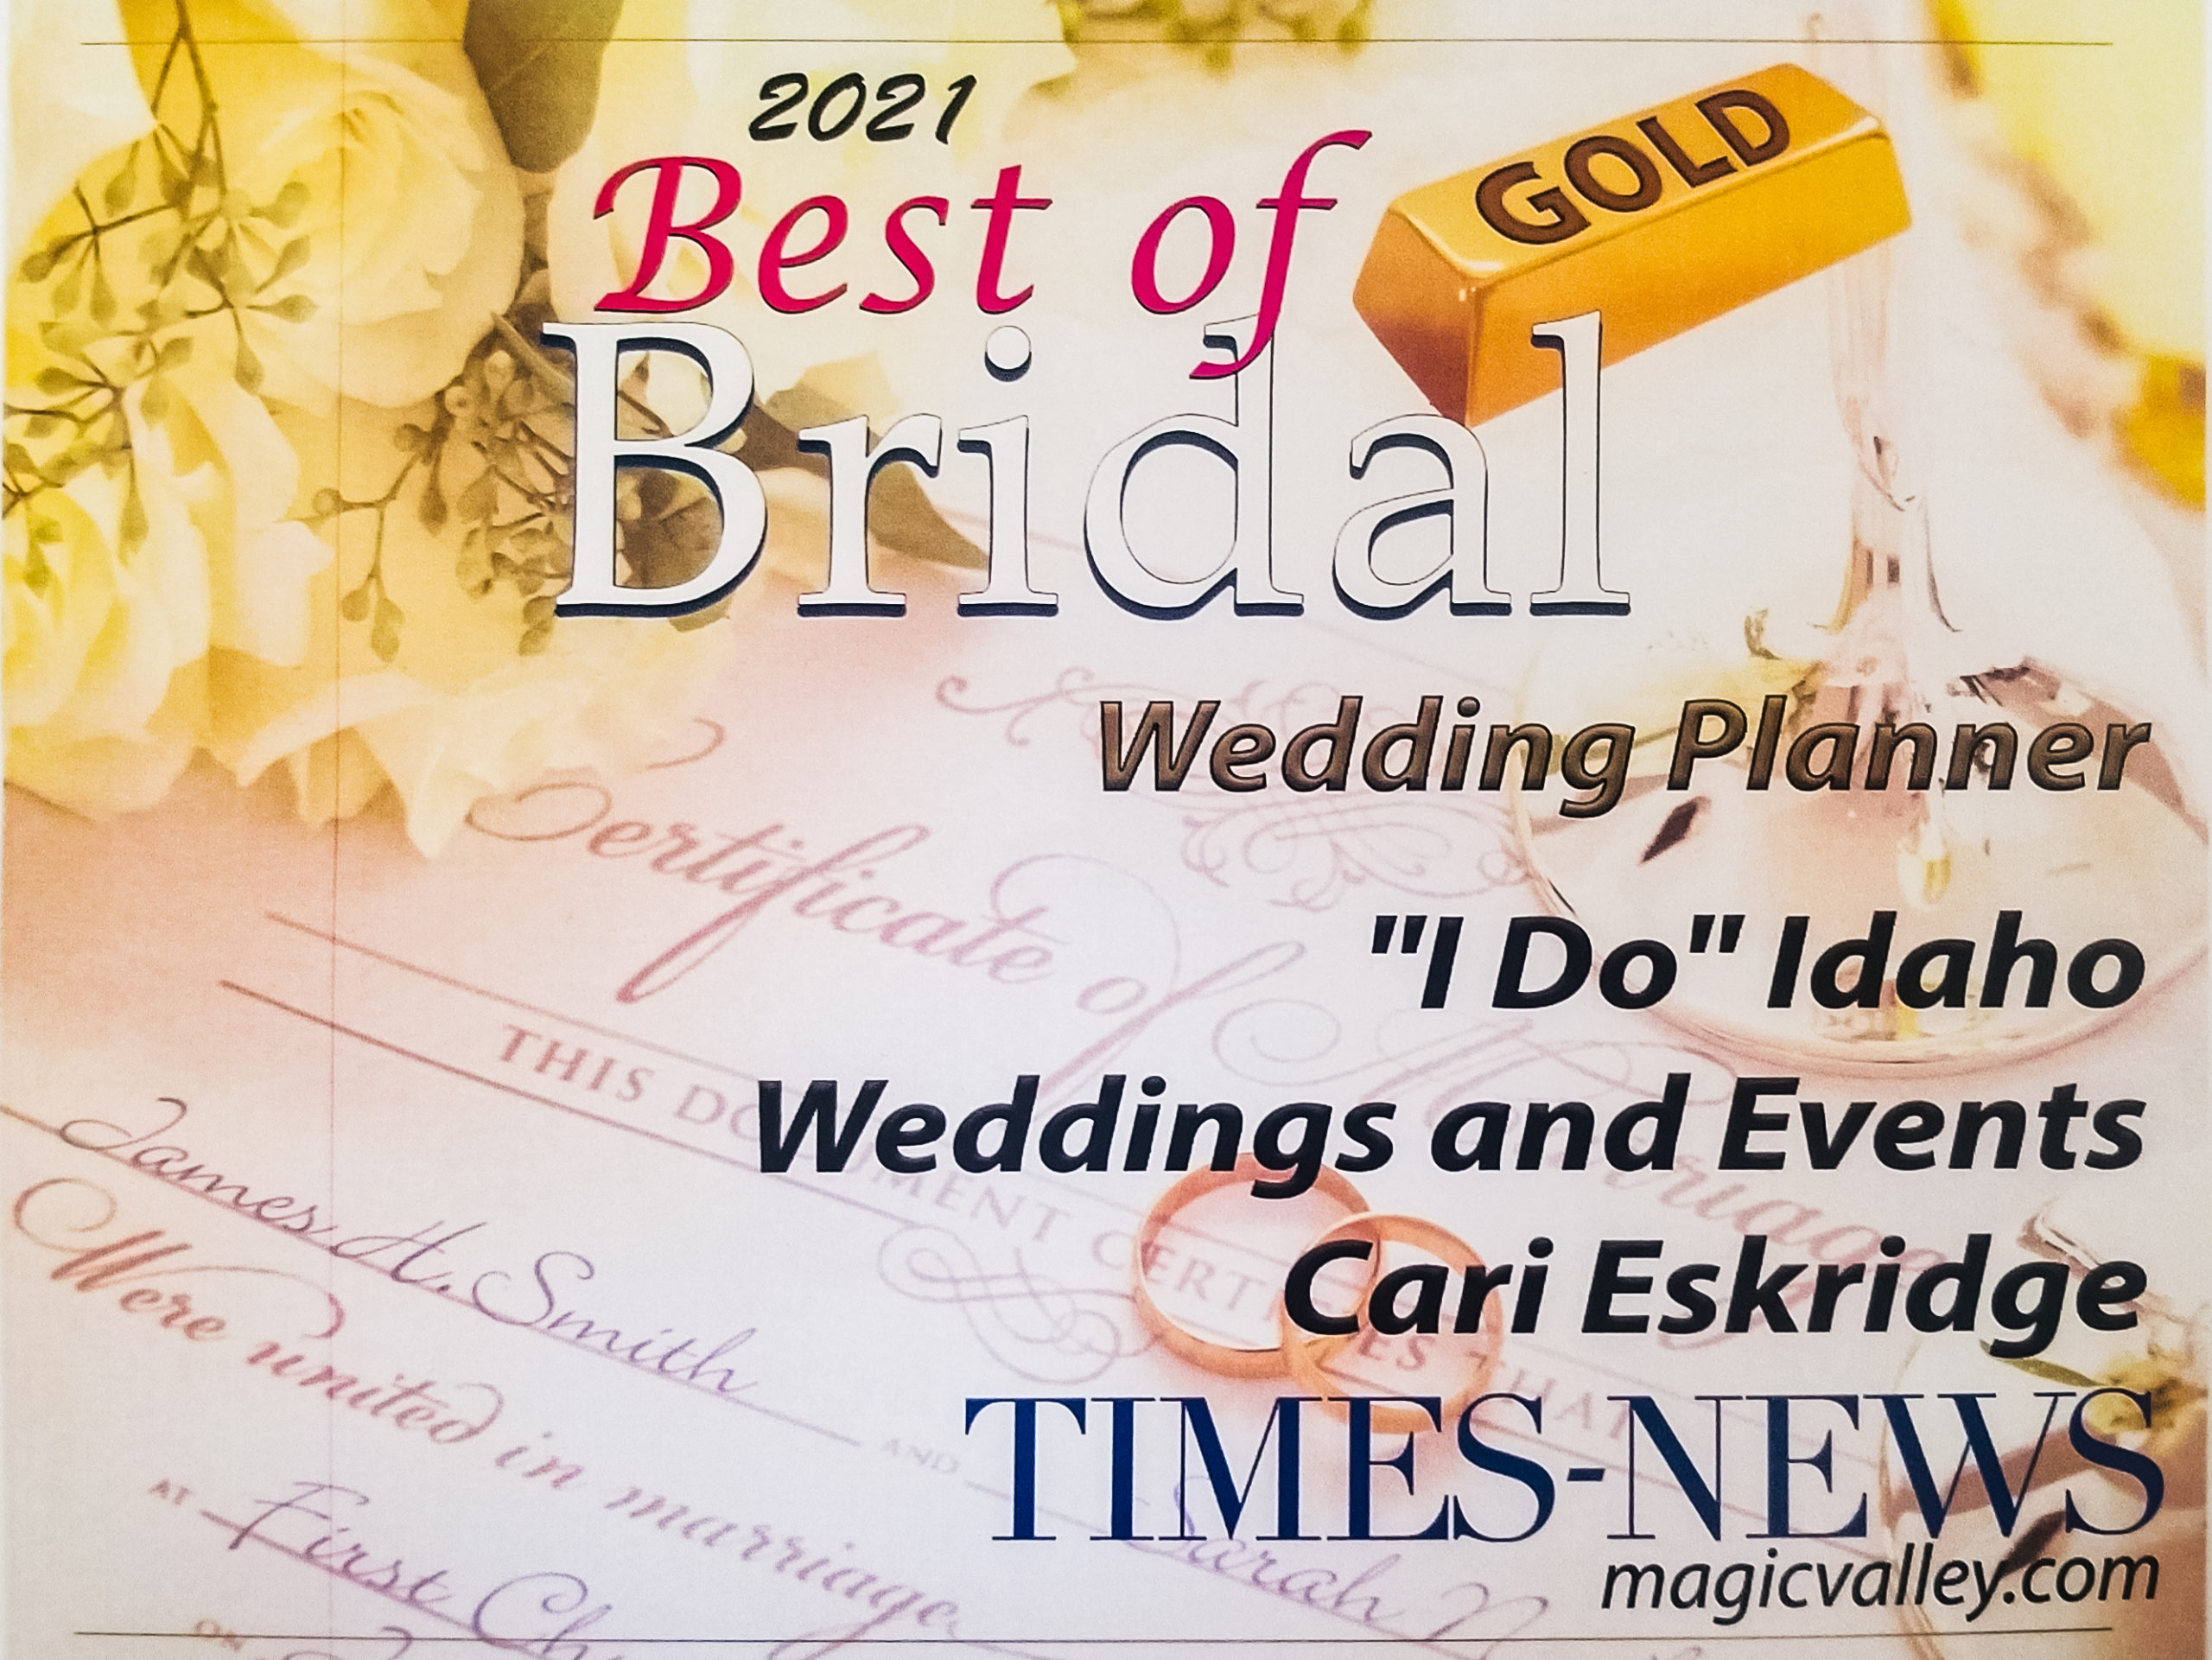 Award from Times-News for Wedding Planning.